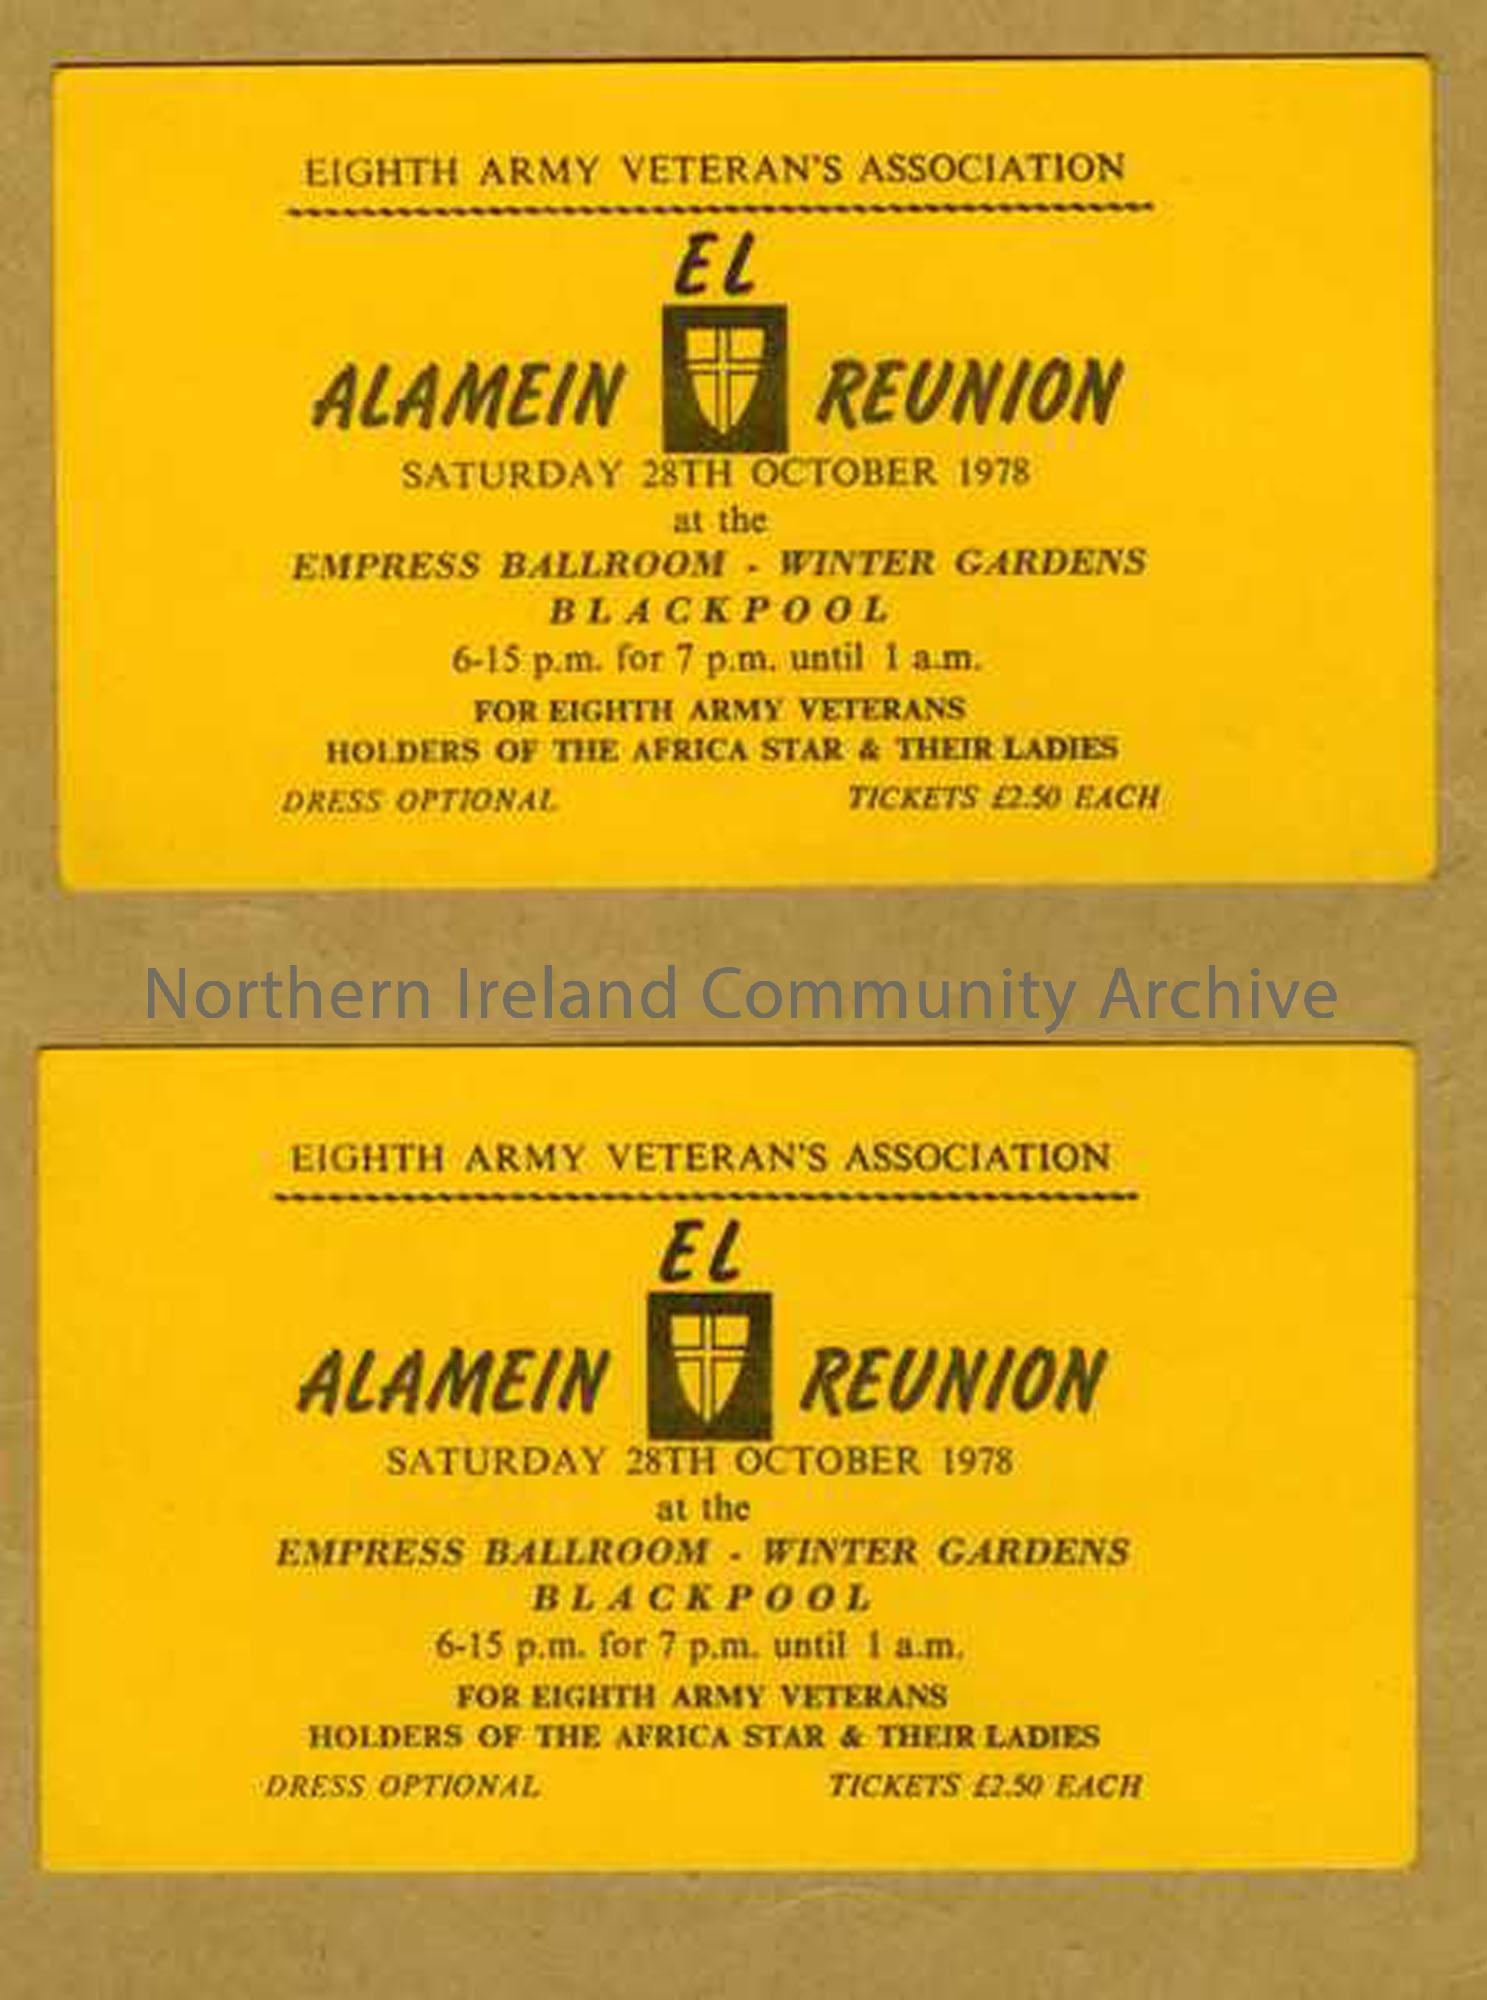 Alamein soldiers reunion ticket for Saturday 28th October 1978